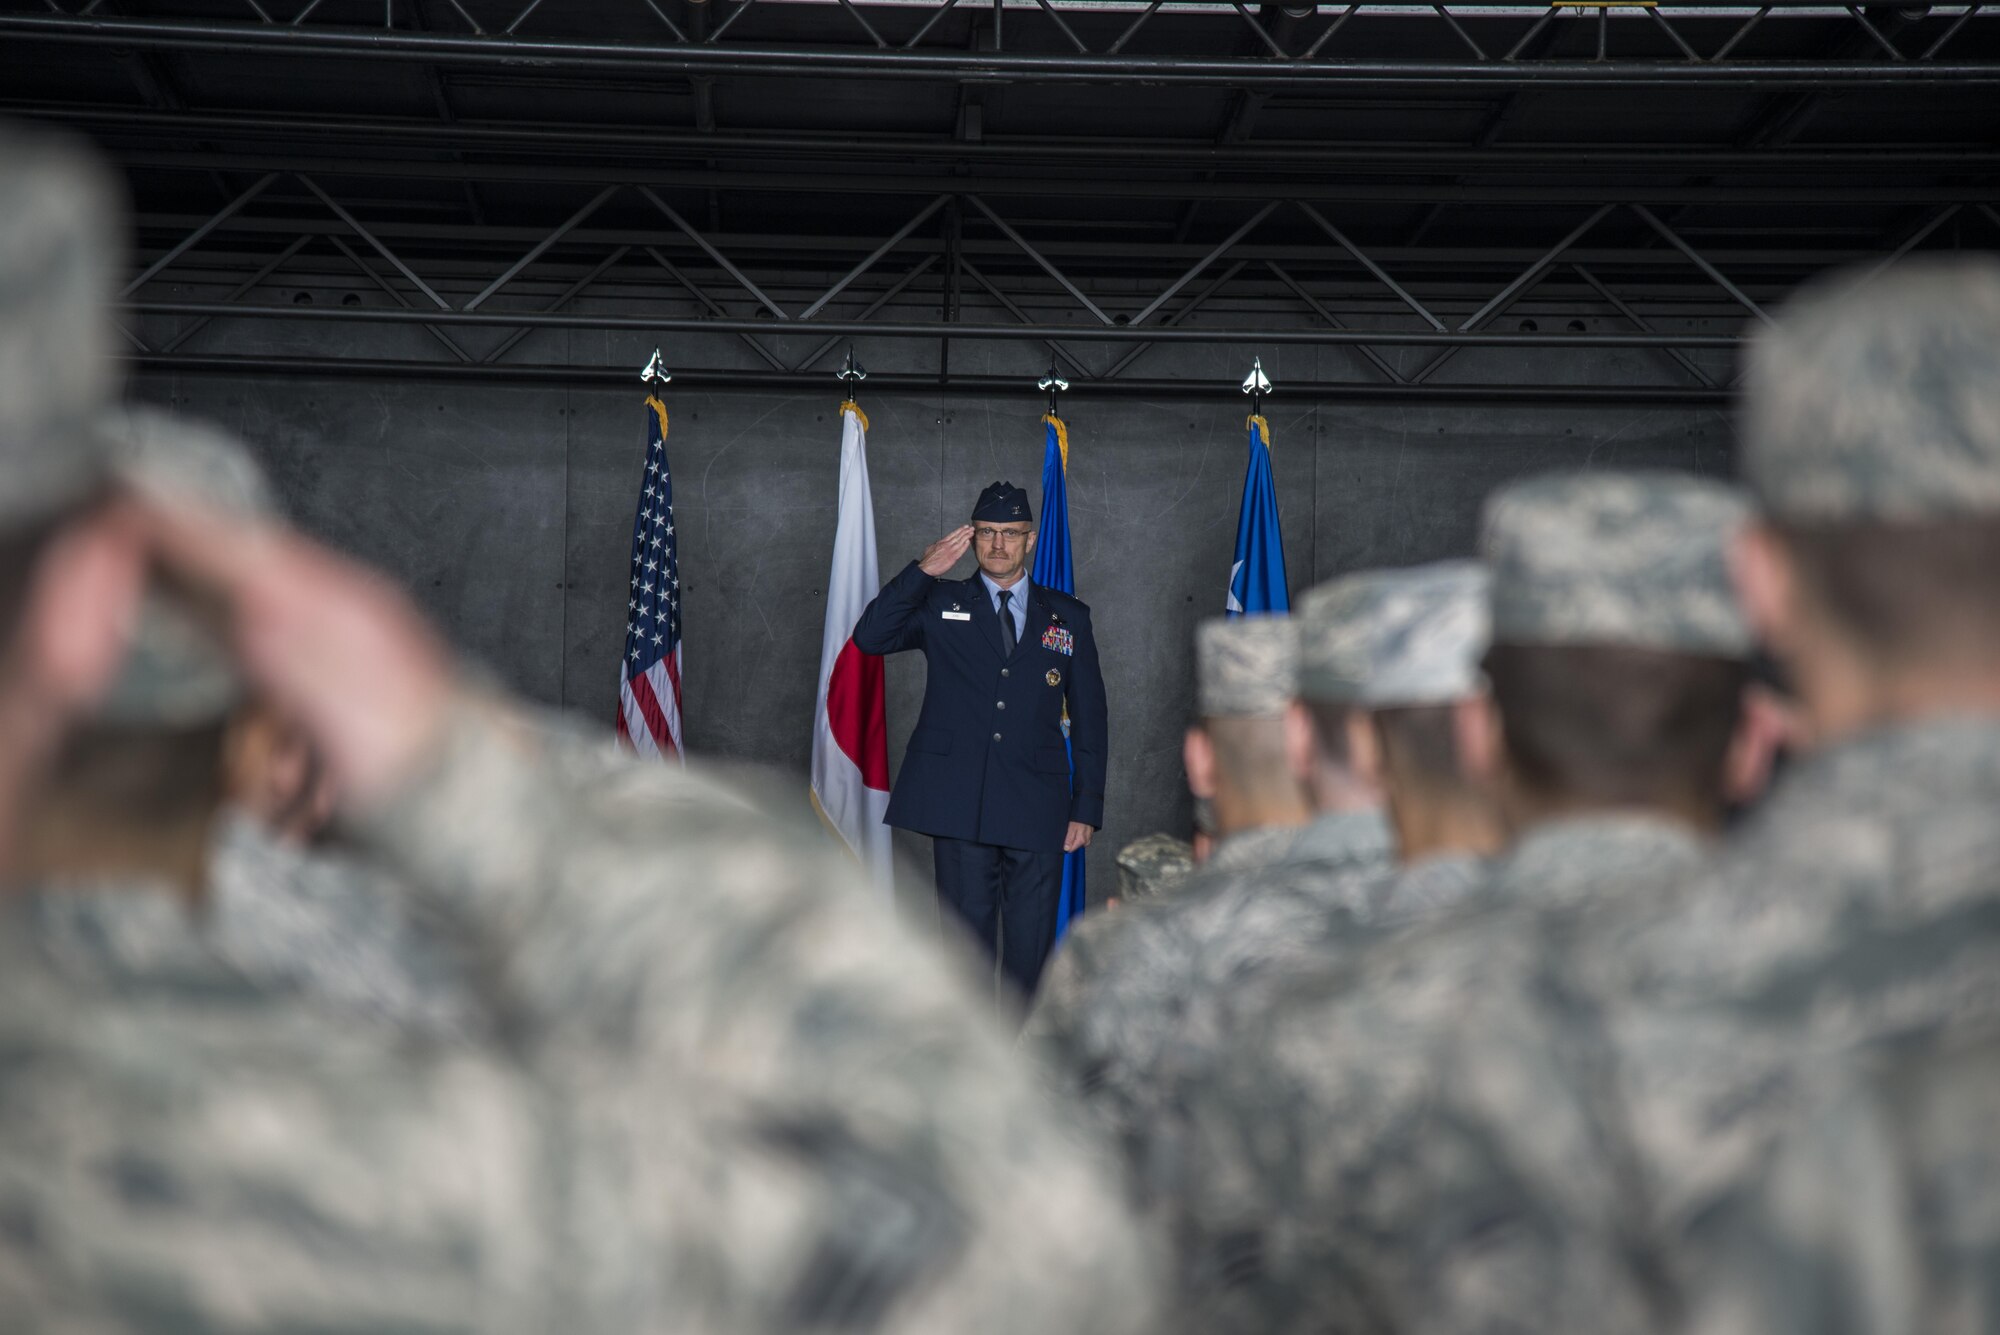 Airmen from the 35th Fighter Wing render their first salute to U.S. Air Force Col. R. Scott Jobe, 35th FW commander, during a change of command ceremony at Misawa Air Base, Japan, July 7, 2016. Prior to arriving at Misawa AB, Jobe was the J53 contingency planning division chief with U.S. Southern Command. (U.S. Air Force photo by Senior Airman Brittany A. Chase)